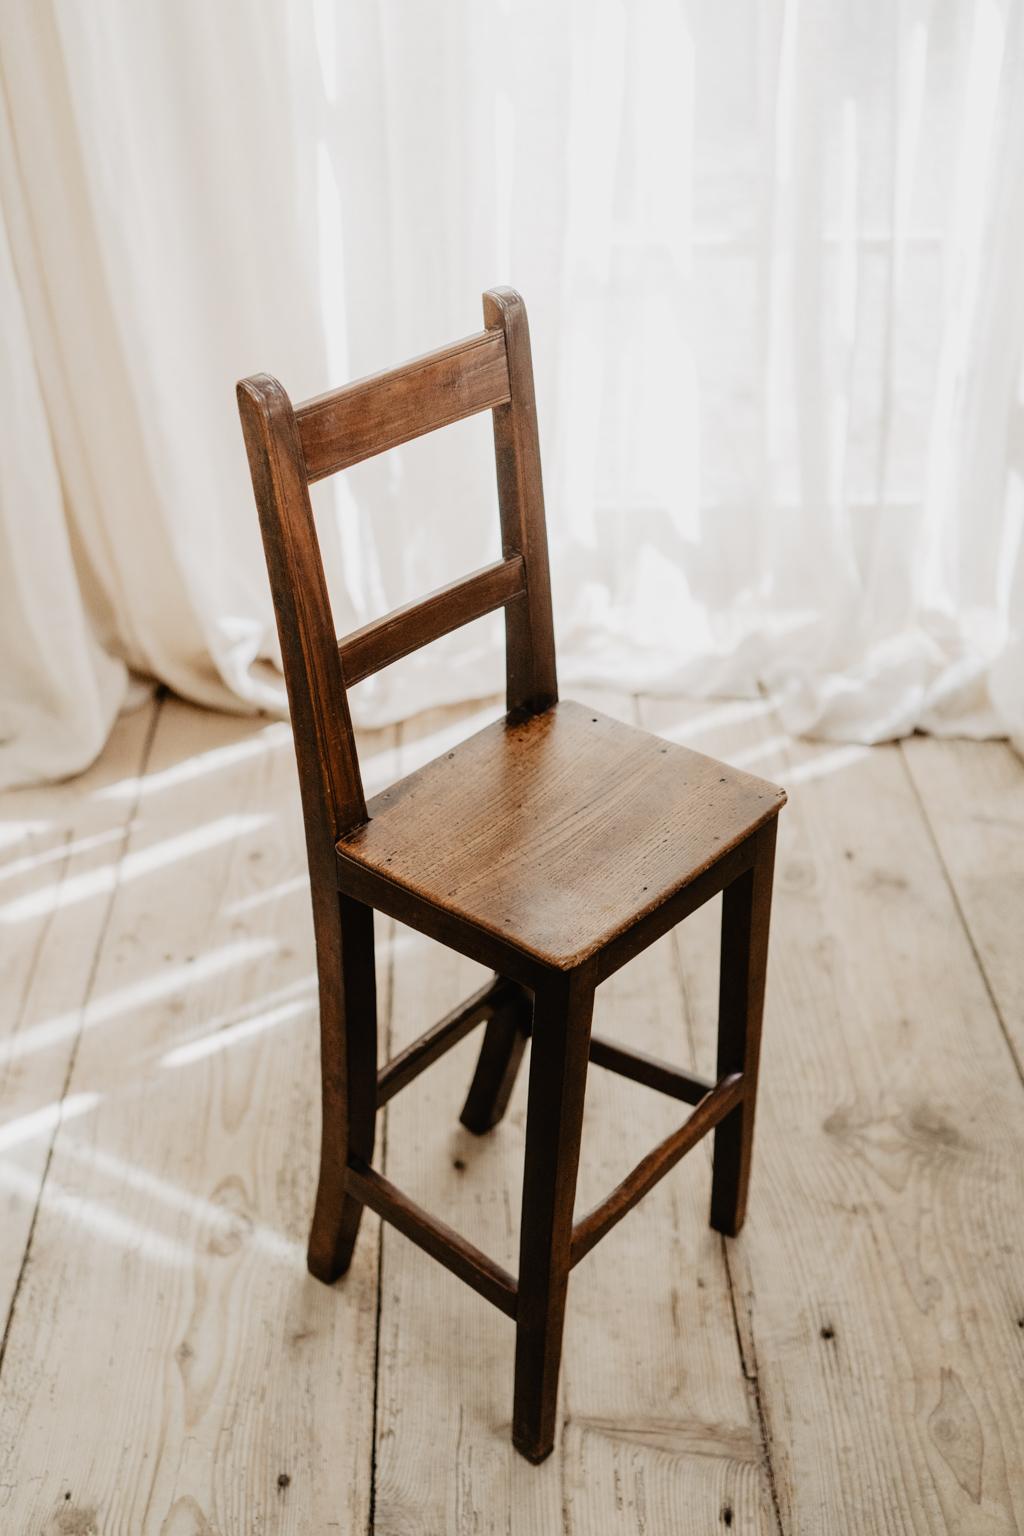 A lovely and quirky elm and fruitwood correction chair, used to teach straight up sitting during the 19th century in English schools.